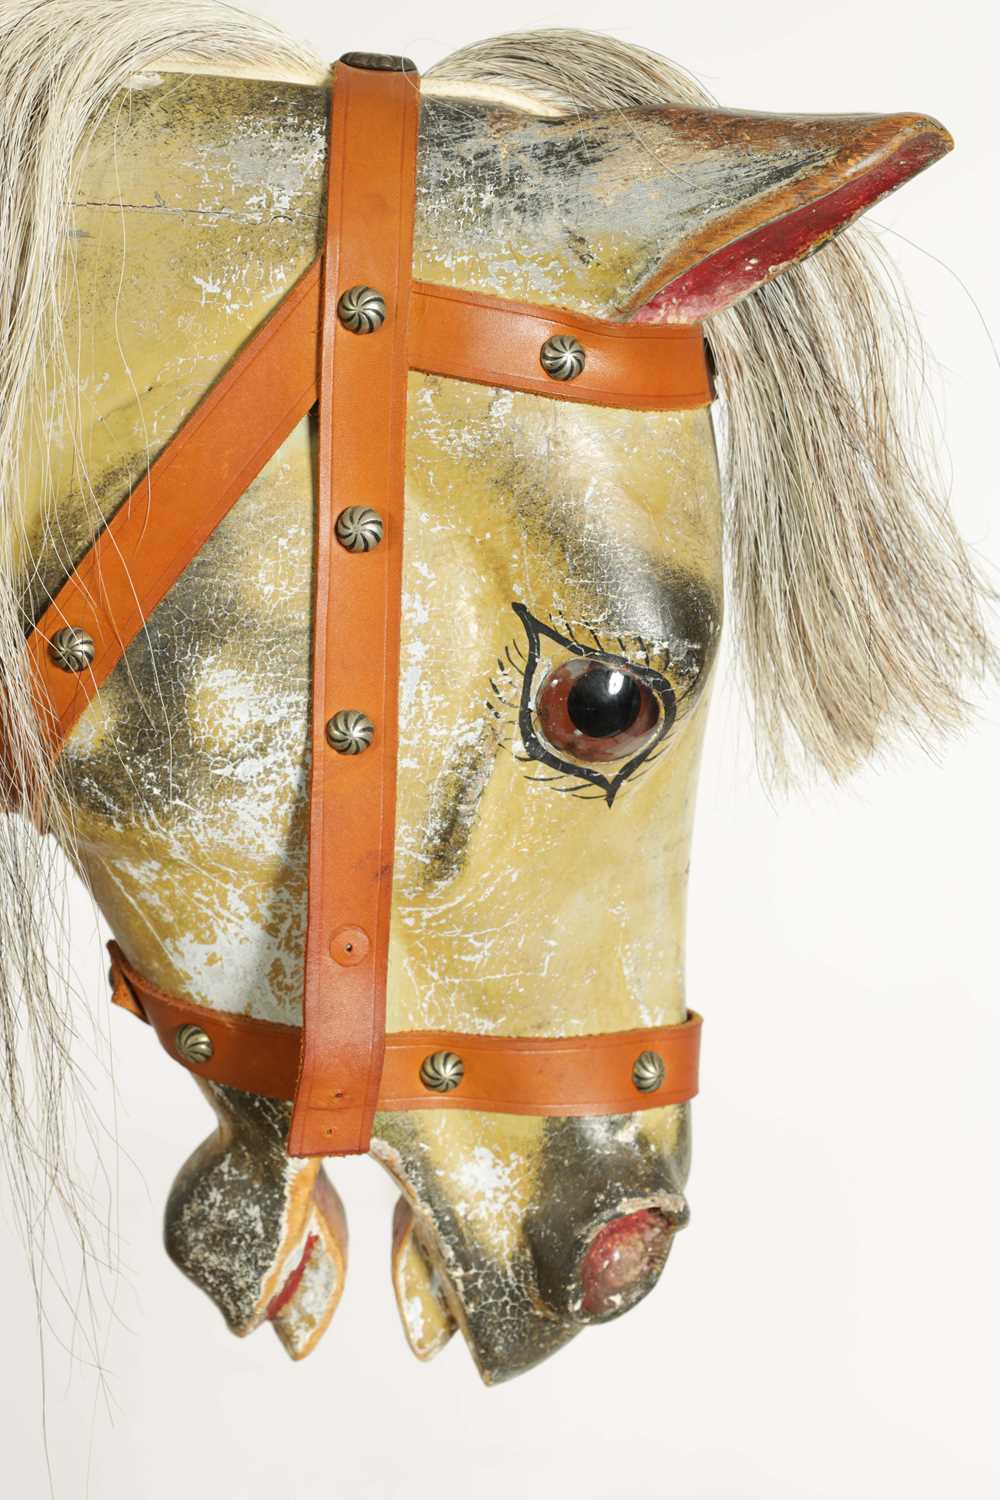 AN OVERSIZE 19TH CENTURY ROCKING HORSE - Image 2 of 7